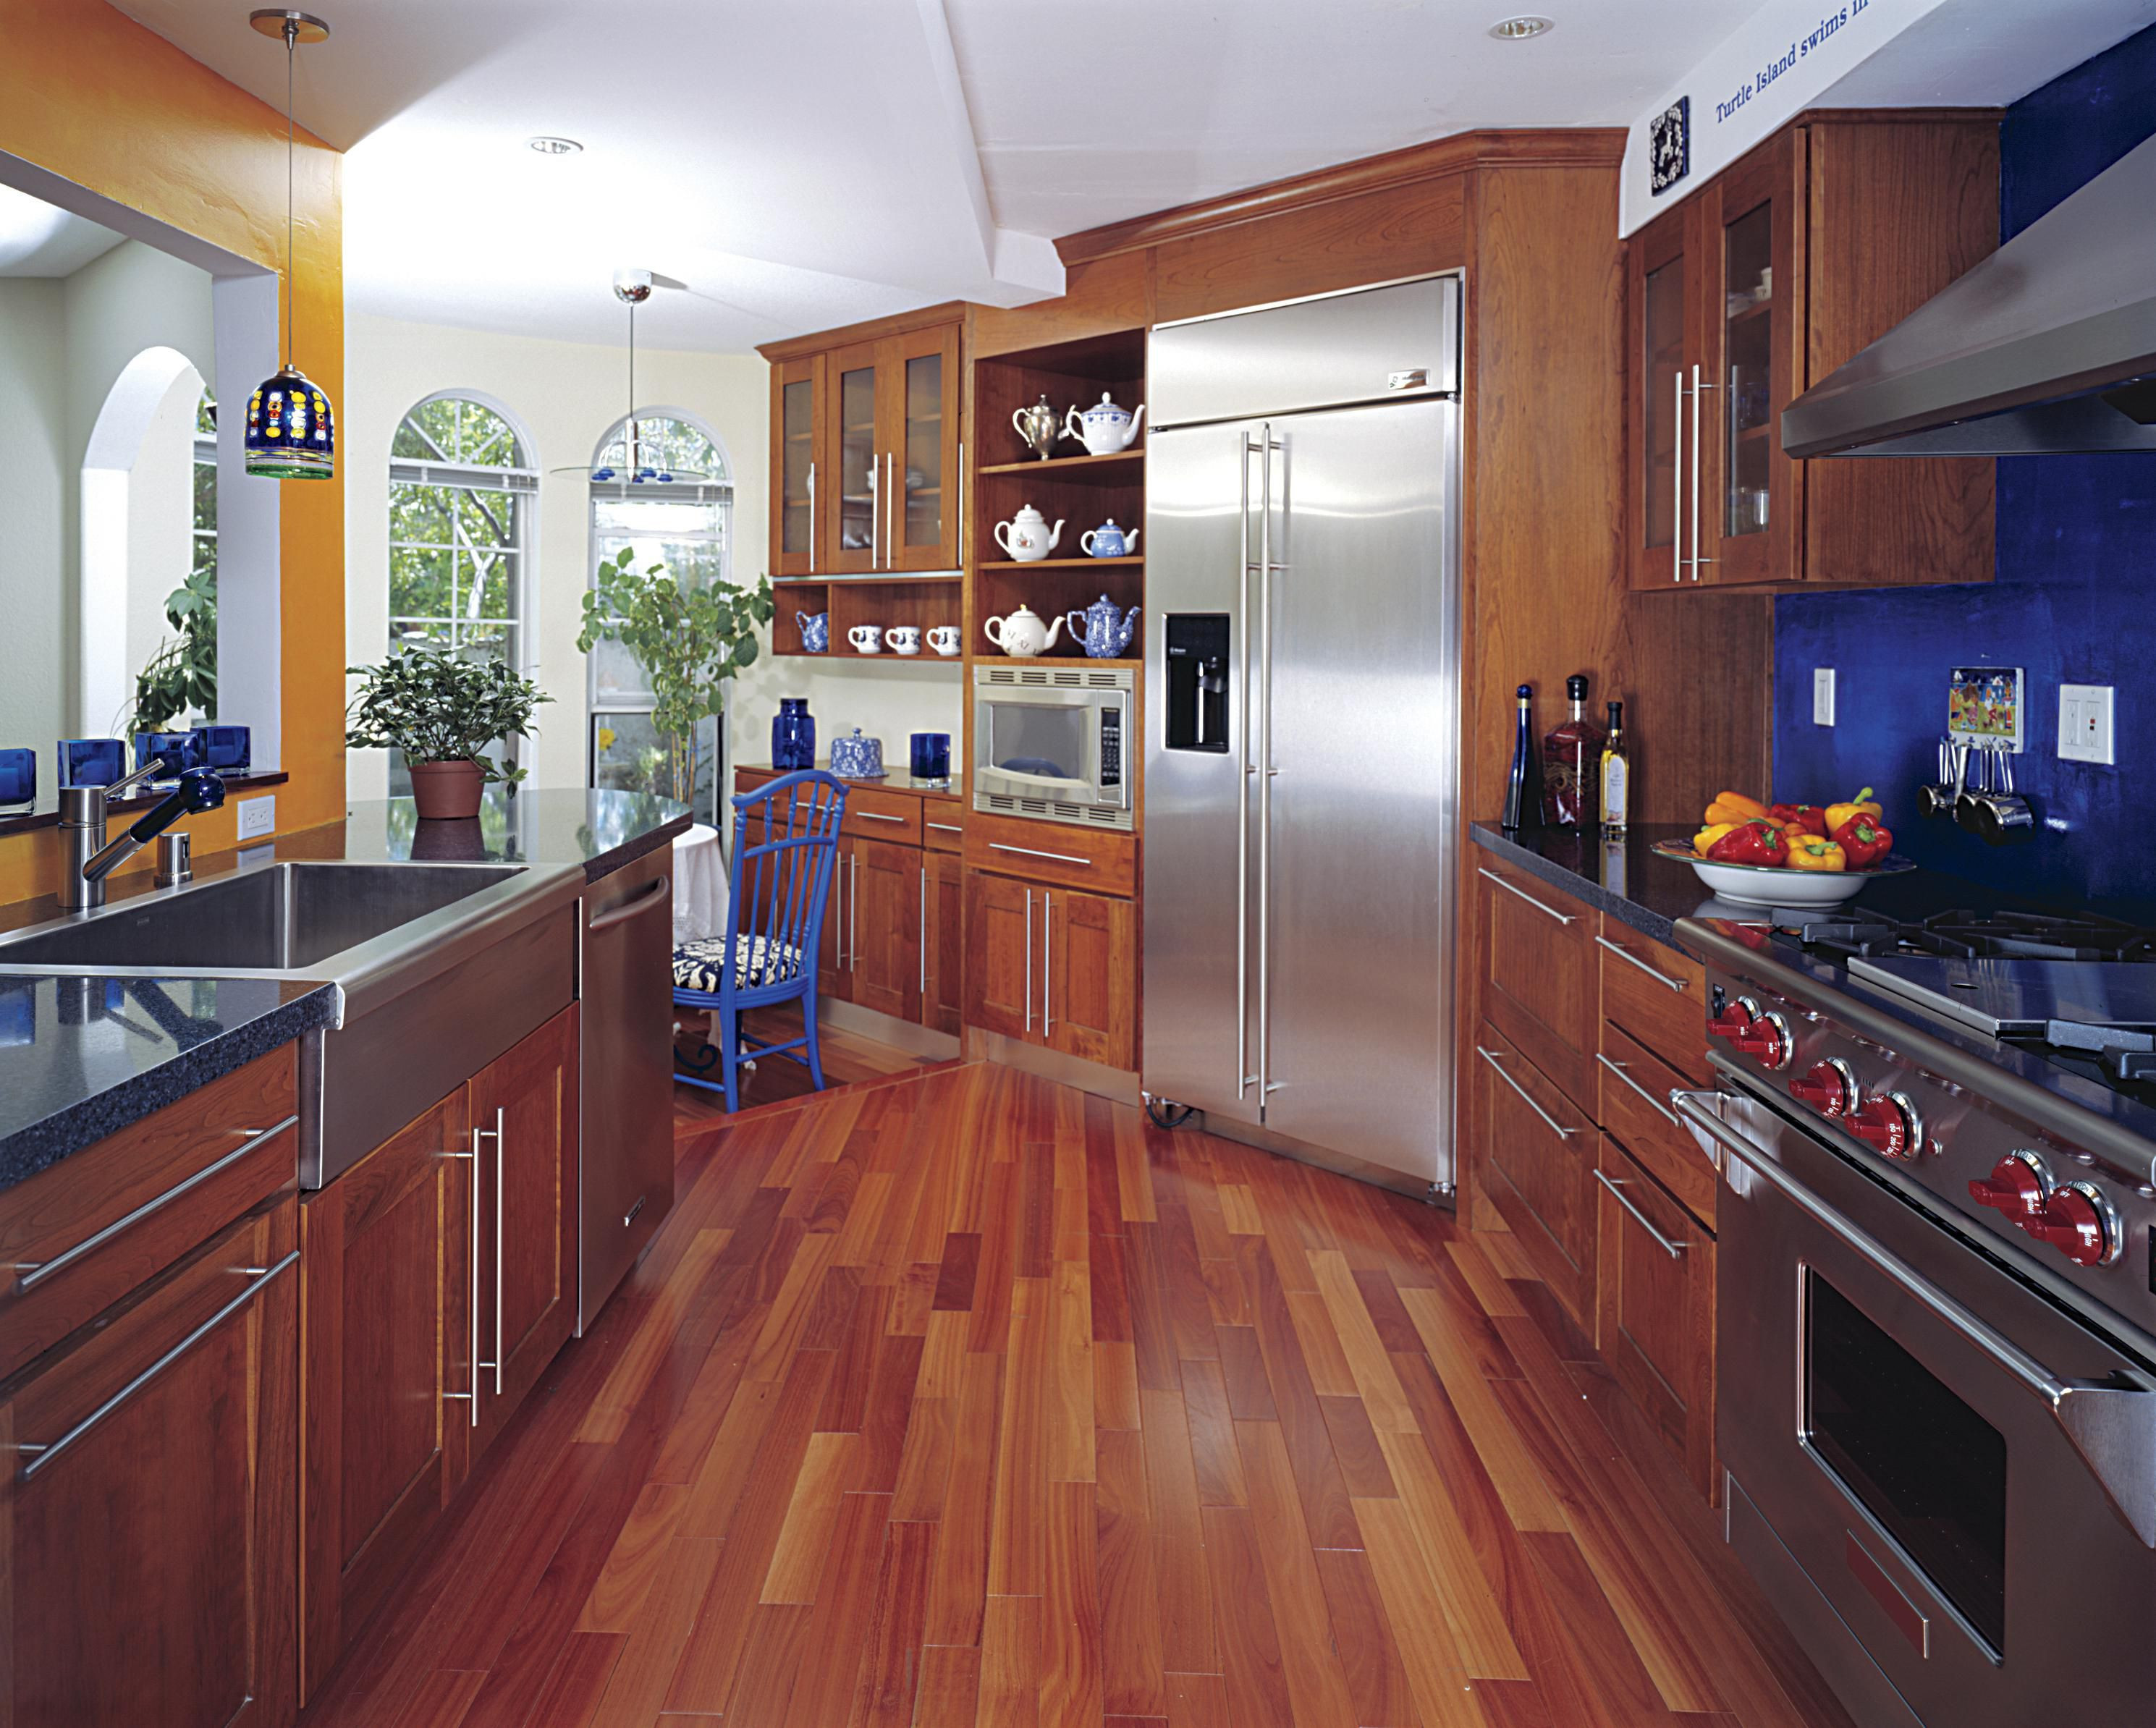 10 Unique Dark Oak Hardwood Floors 2024 free download dark oak hardwood floors of hardwood floor in a kitchen is this allowed intended for 186828472 56a49f3a5f9b58b7d0d7e142